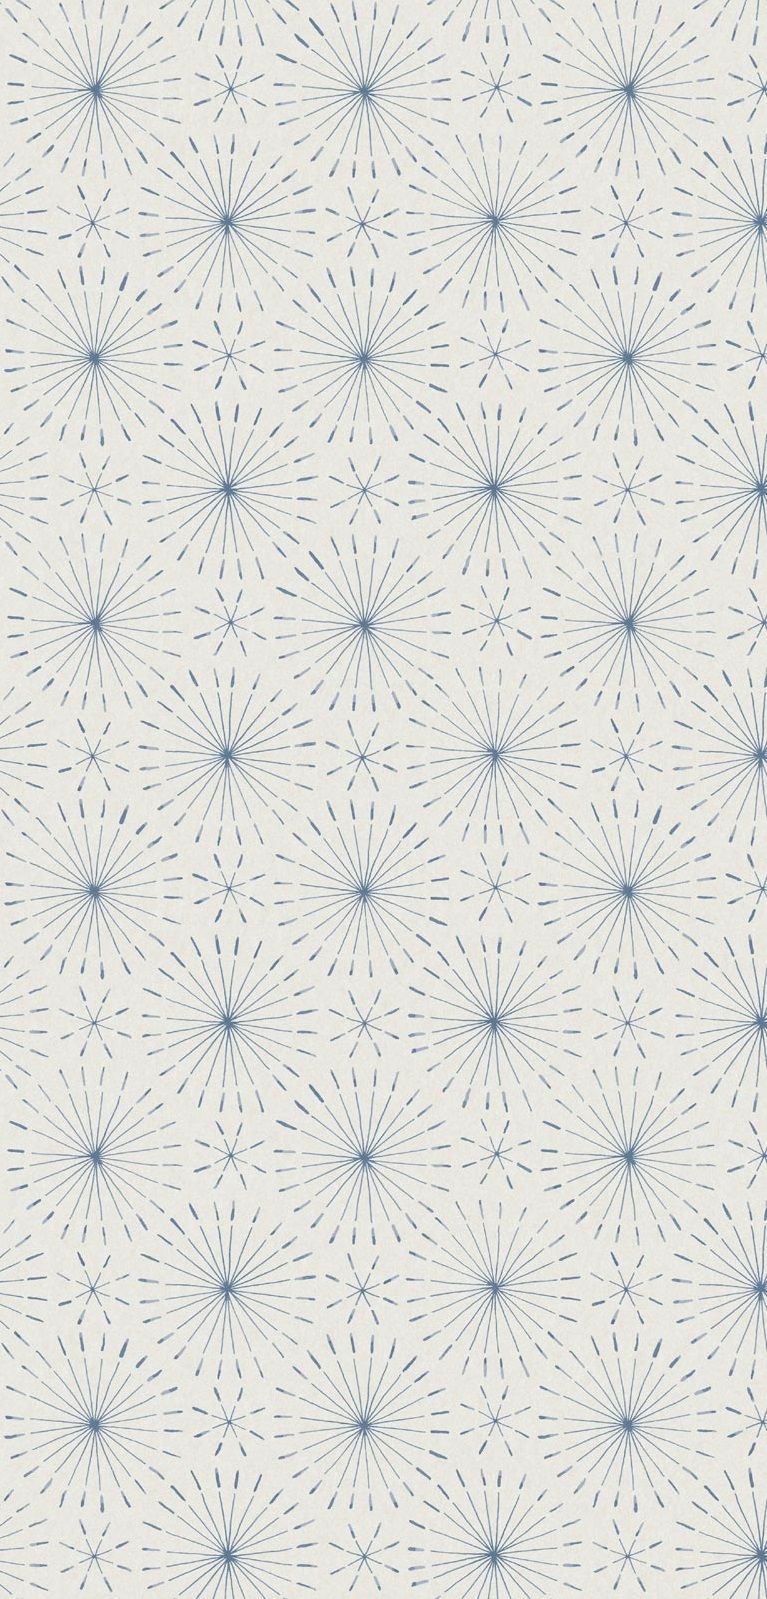 This light blue starburst wallpaper is in such a nice simple